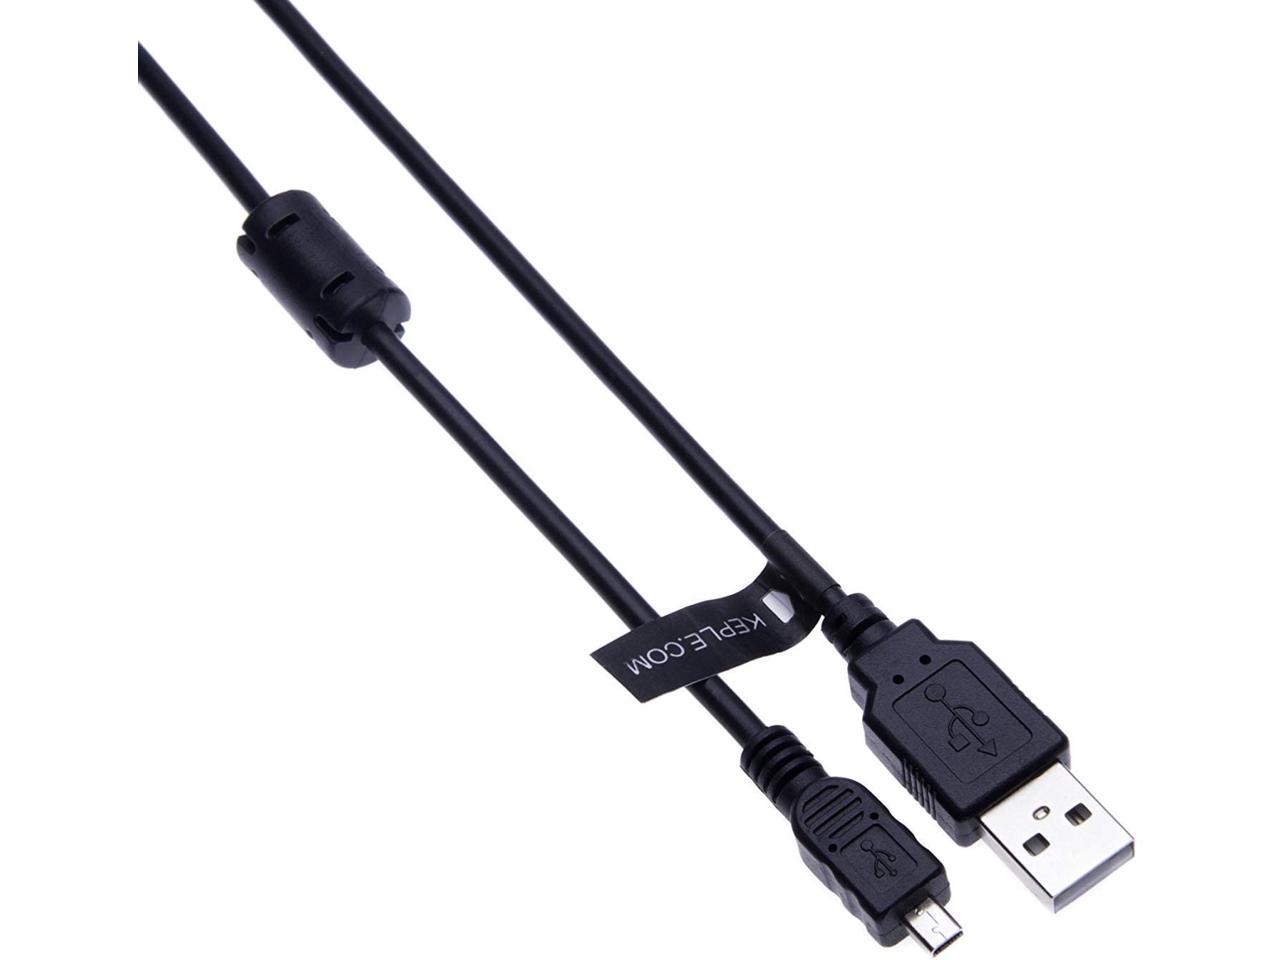 Charging And Data Usb Cable For Olympus Sz-12, Sz-14, Sz-20, Sz-30Mr,  Sz-31Mr, Tg-1 | Sync And Photo Image Transfer Cord | Compatible Models In  Description 